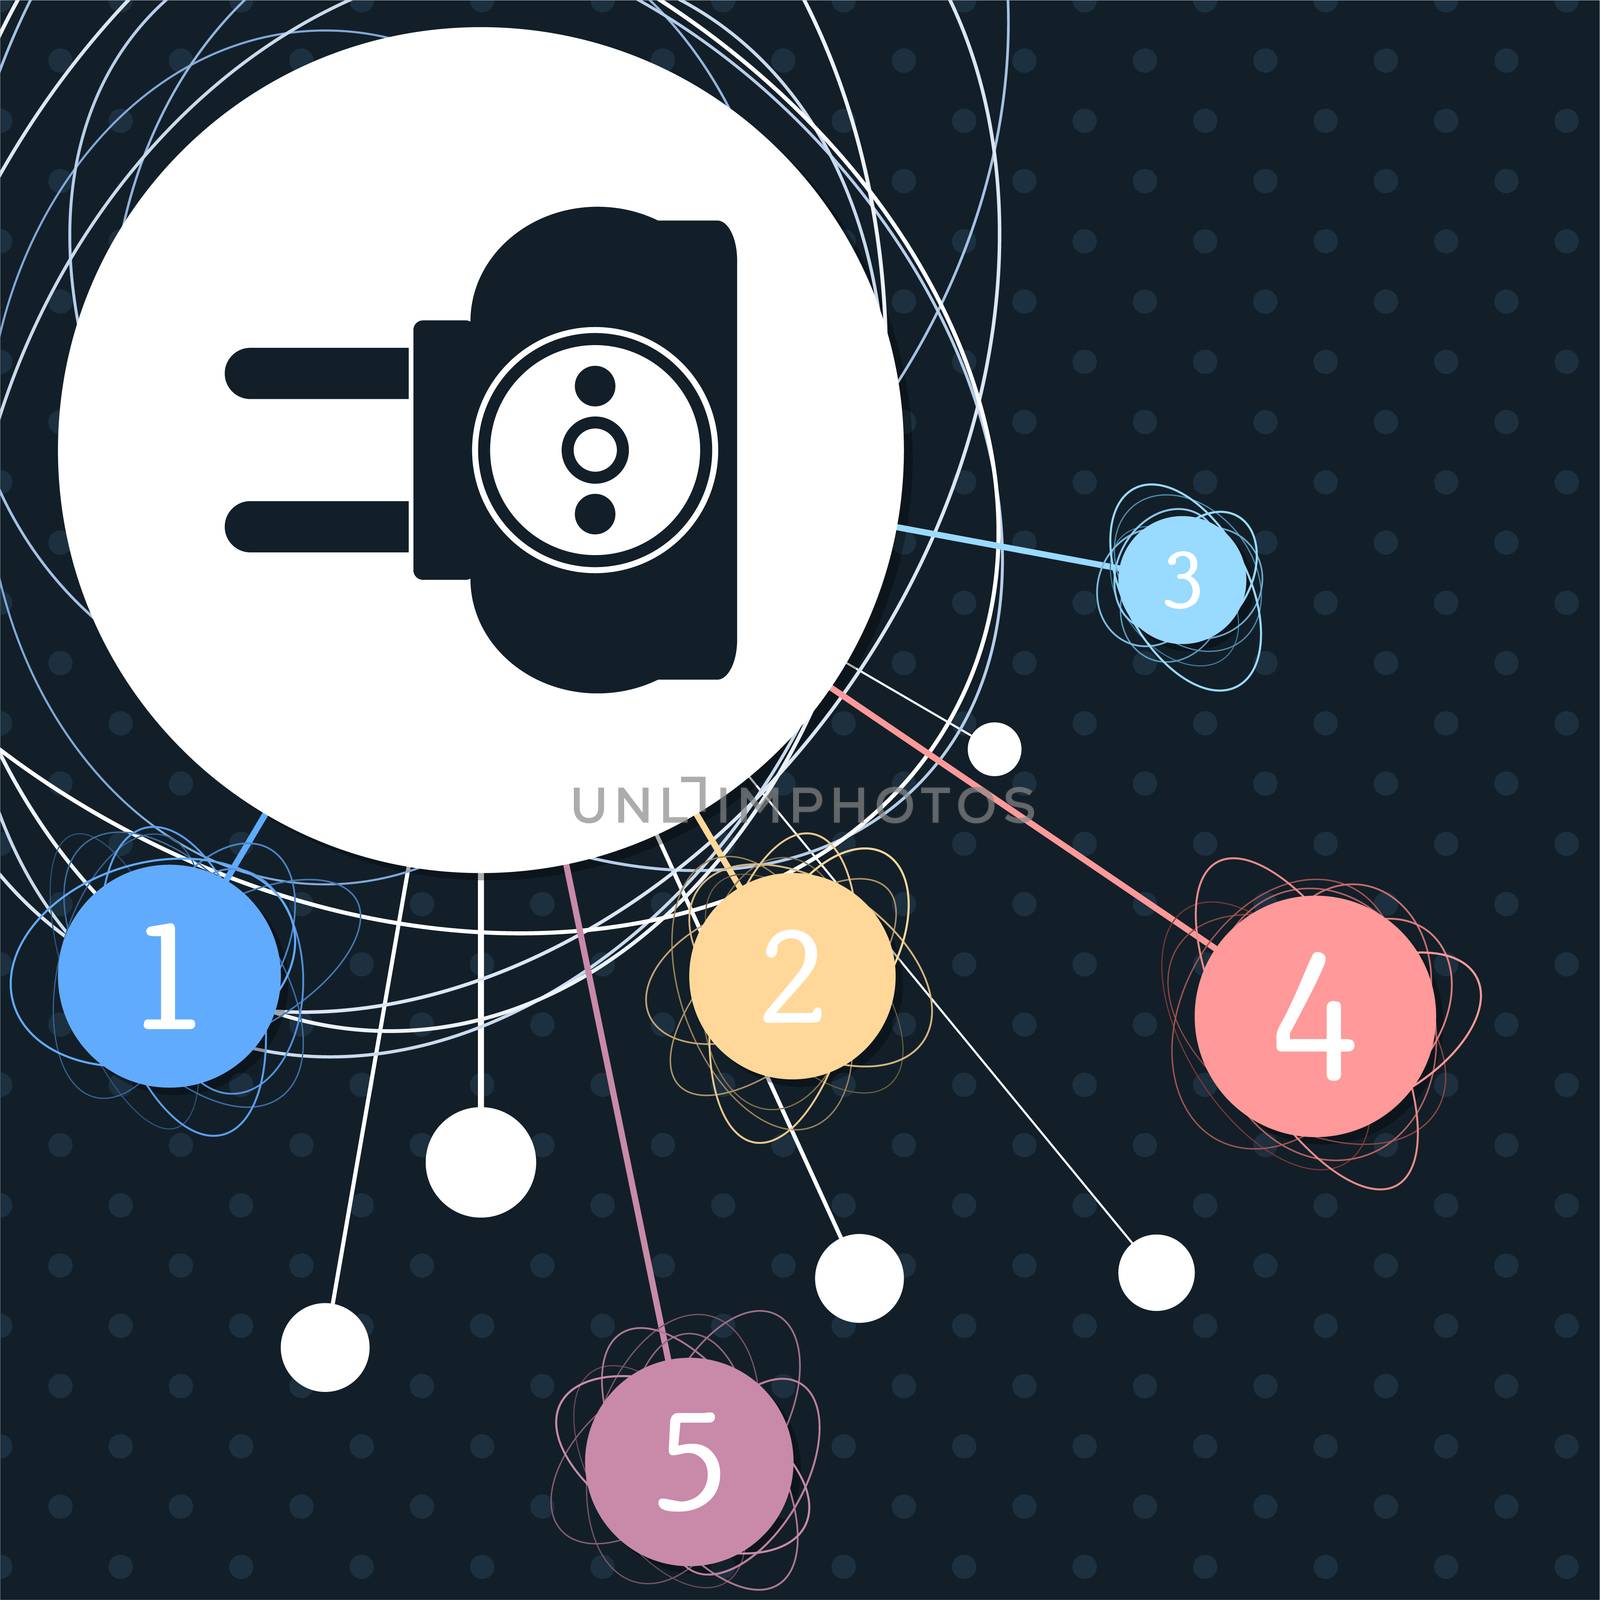 socket icon with the background to the point and with infographic style. illustration